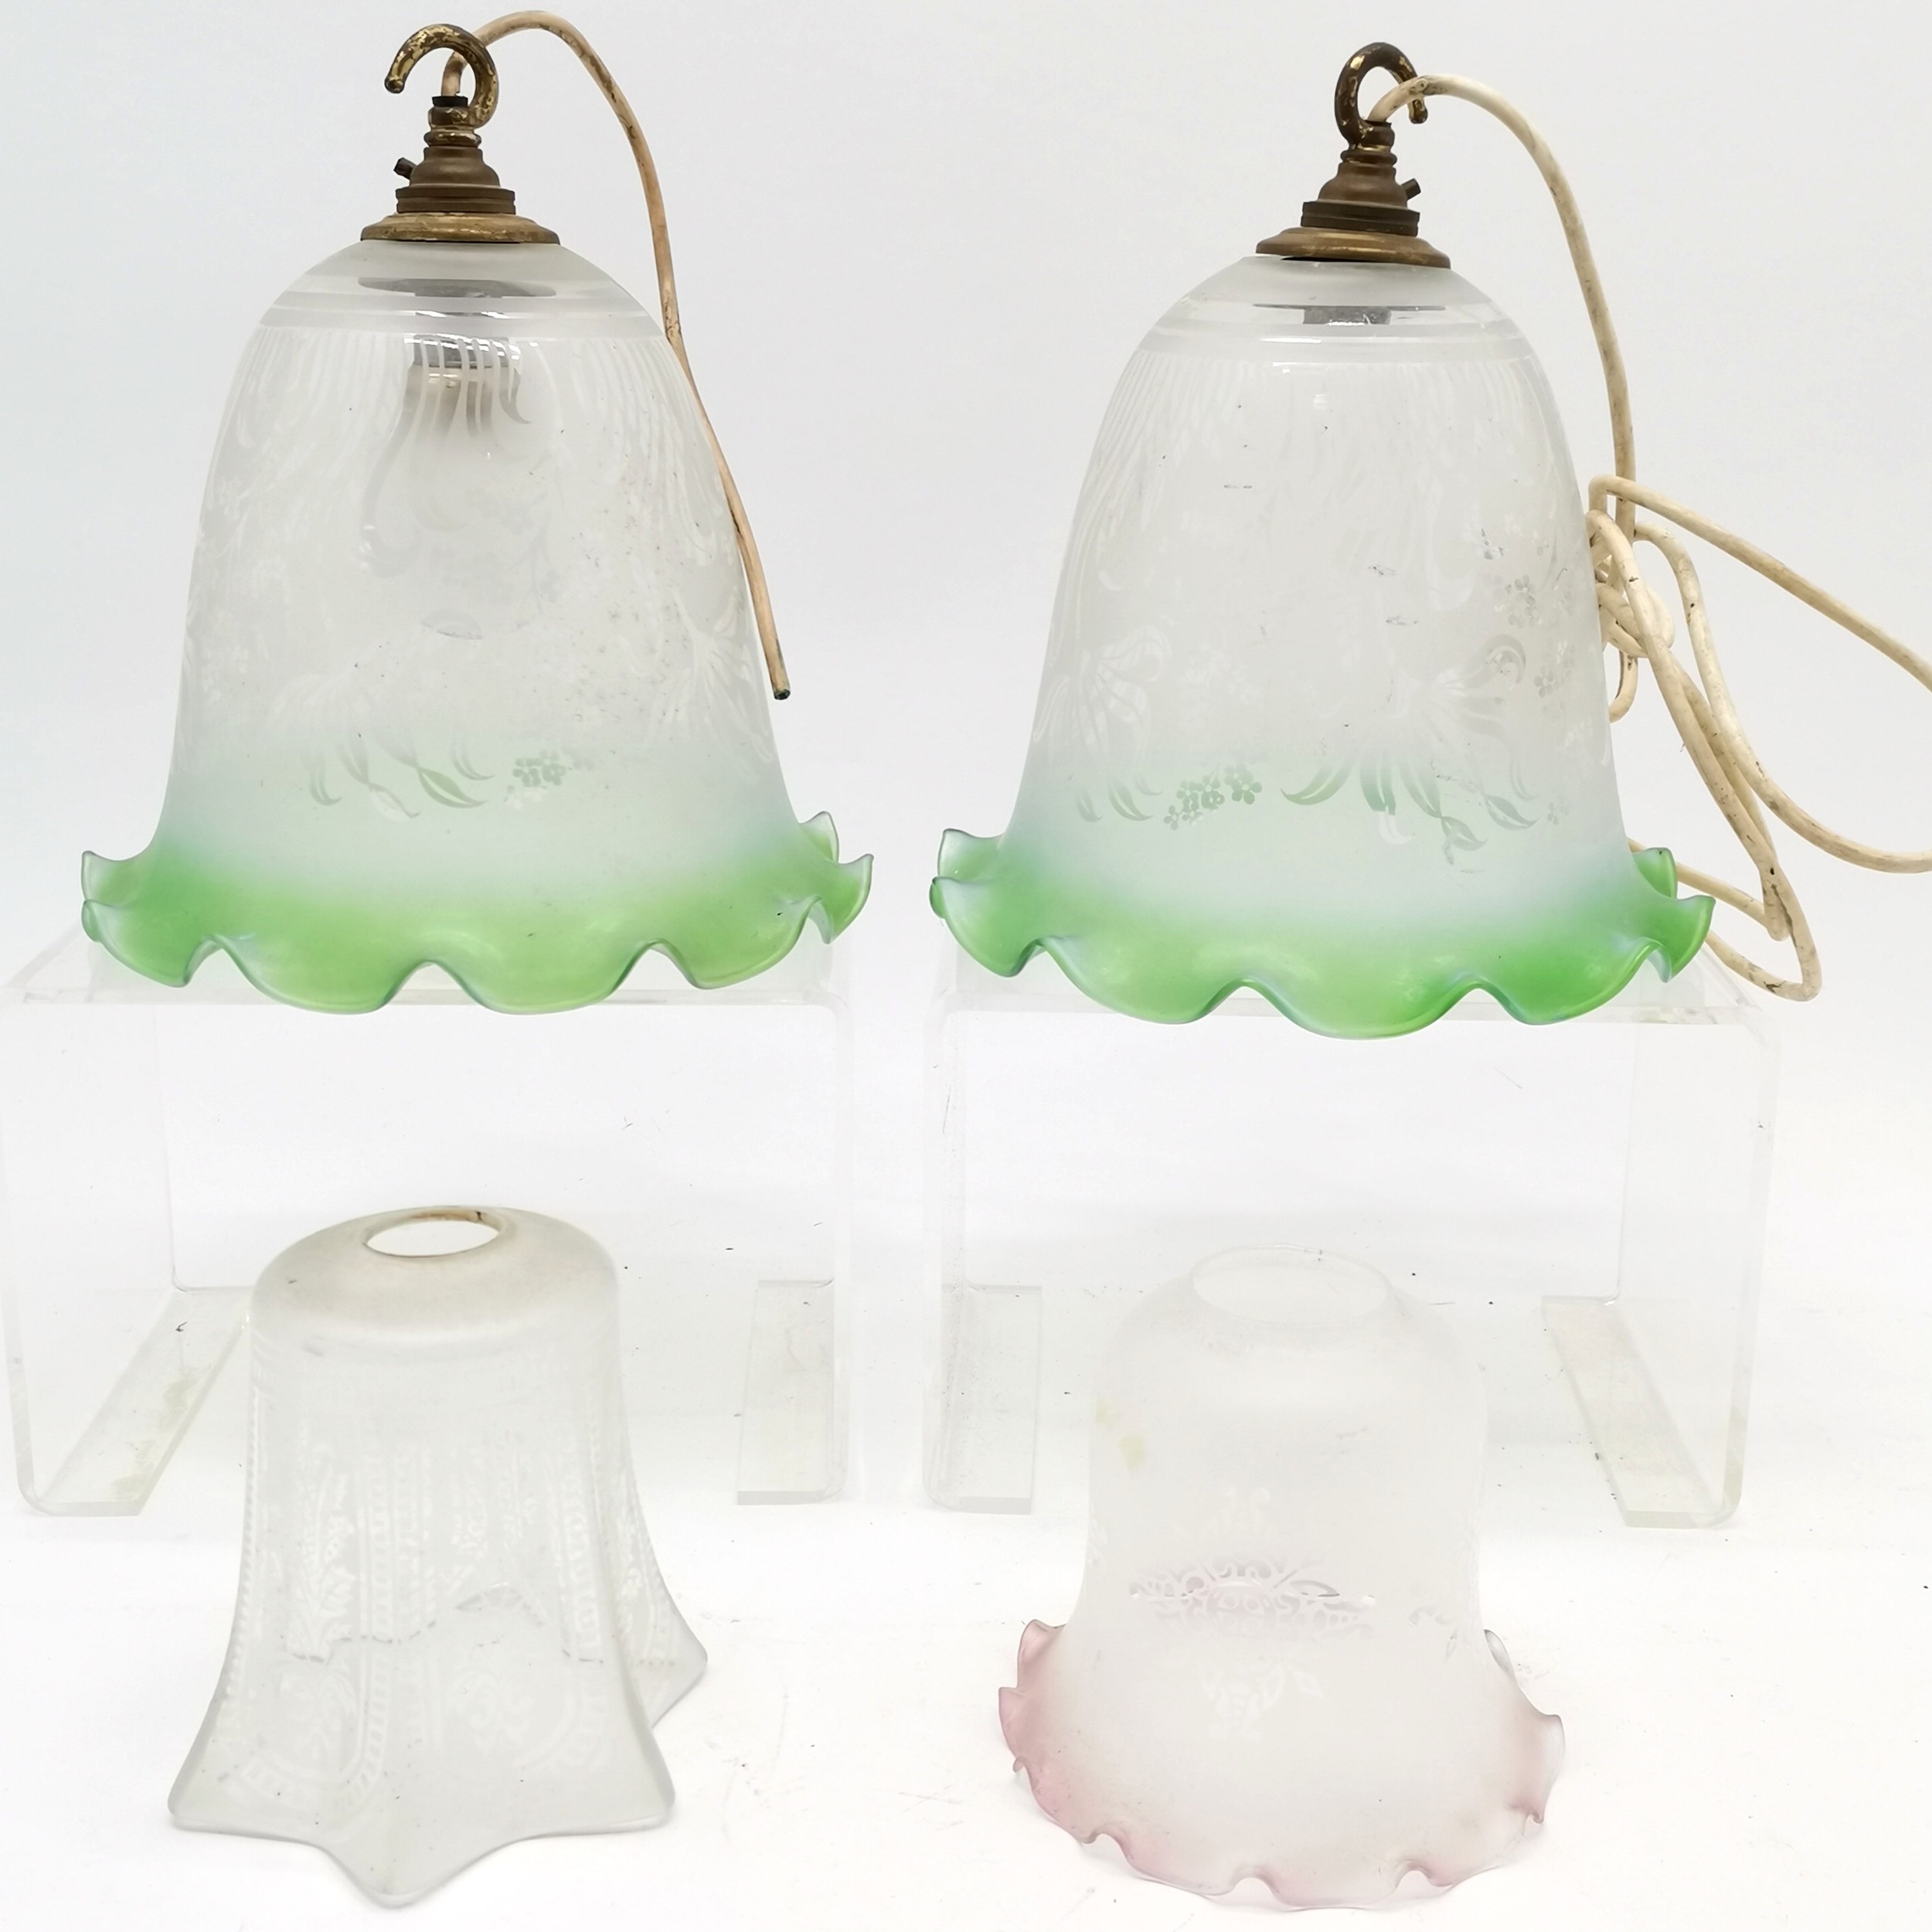 Pair of etched glass ceiling lights with green rim (26cm high) t/w 2 smaller etched glass ceiling